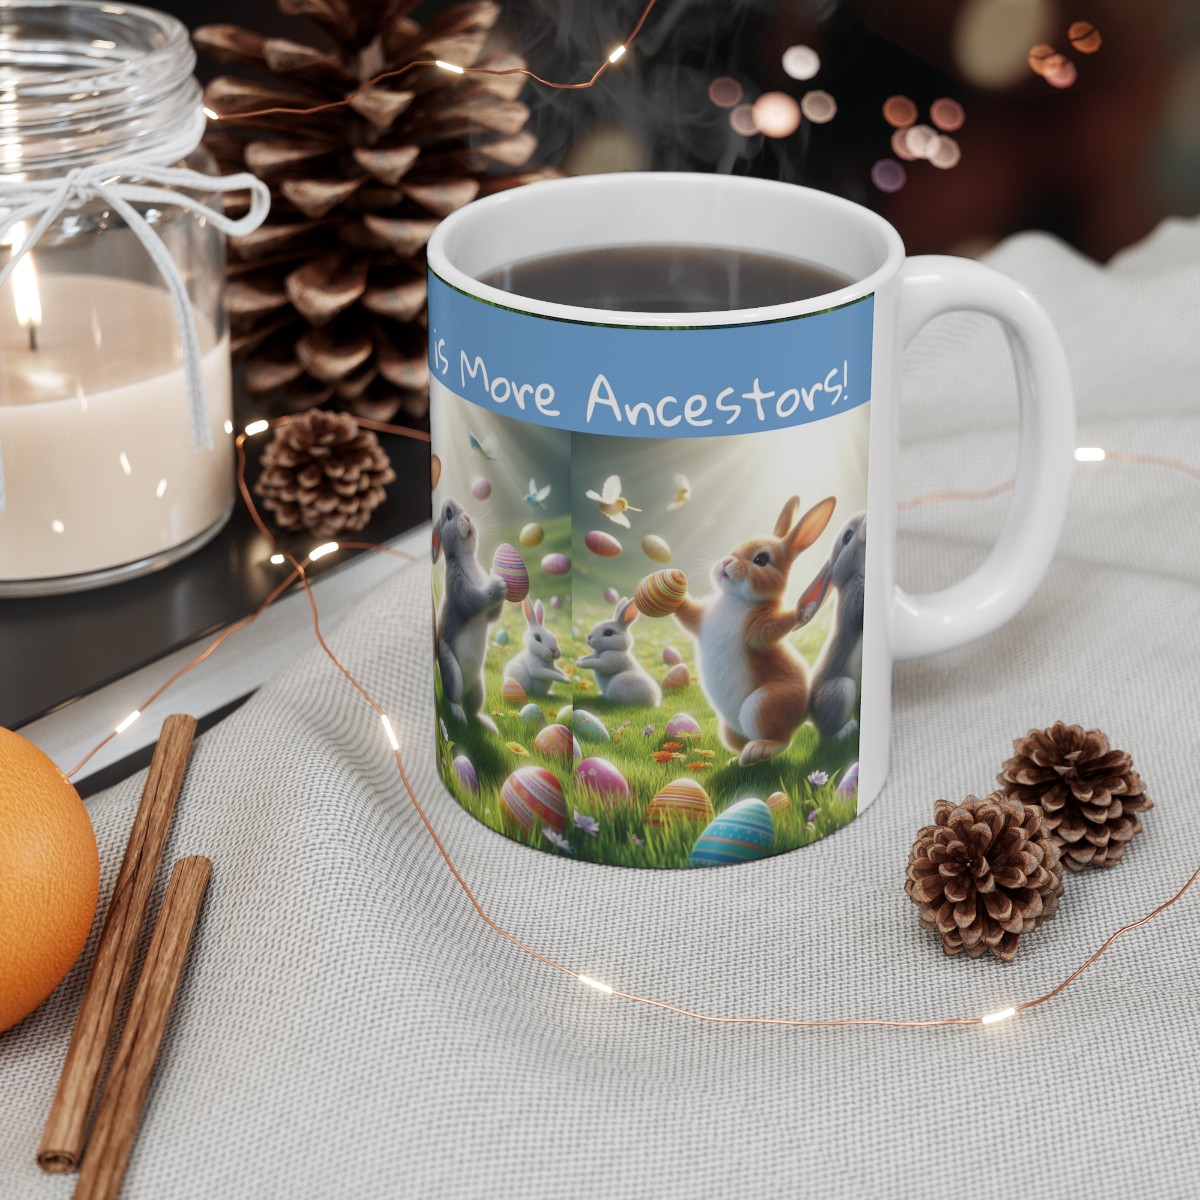 All I Want for Easter is More Ancestors! - Ceramic Mug 11oz product thumbnail image